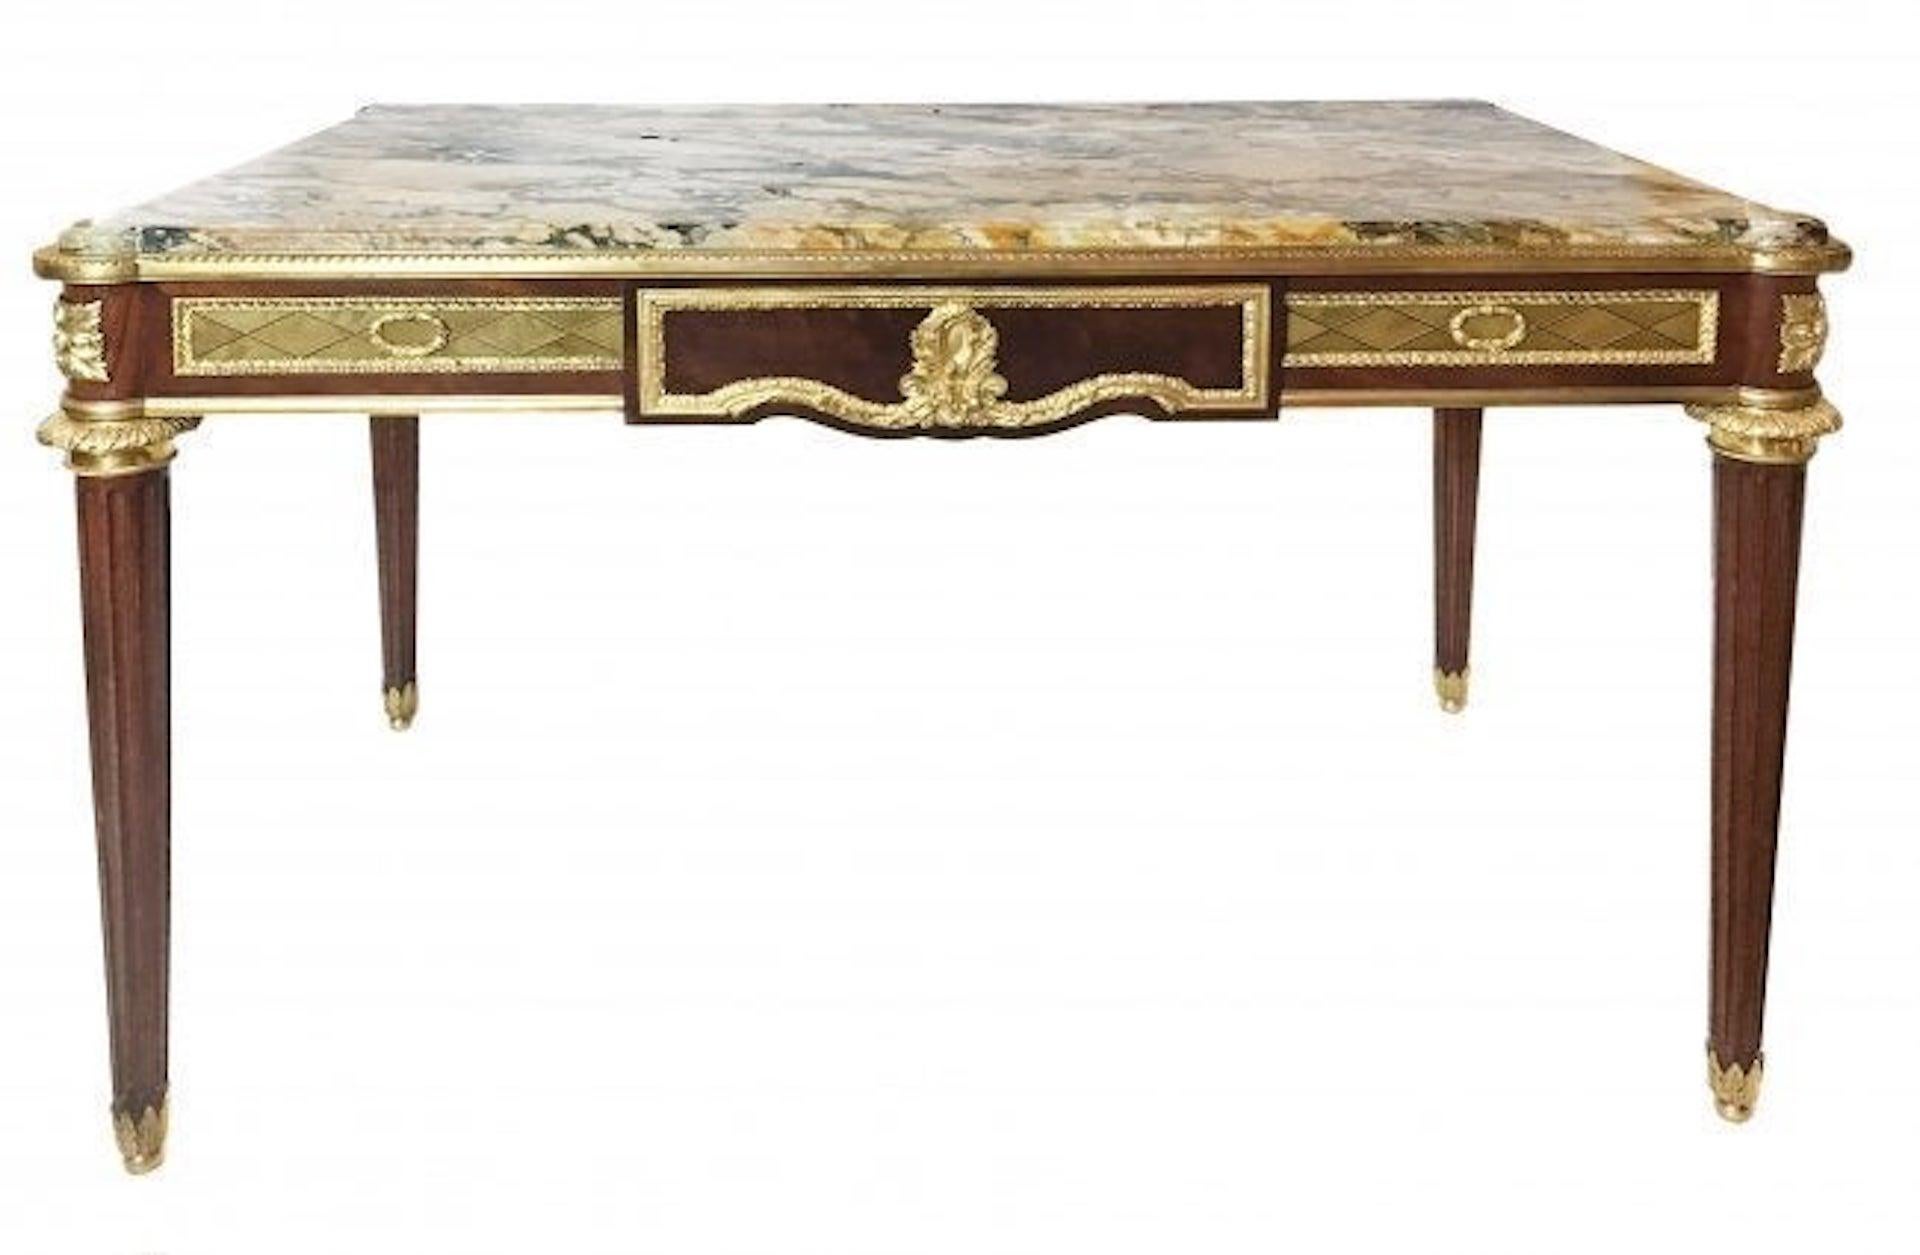 A Louix XVI style gilt-bronze mounted mahogany center table 
Paris, circa 1890
surmounted by a Sarrancolin marble top with rounded corners above a long single frieze drawer and raised on fluted tapering legs, the frieze similarly decorated on the